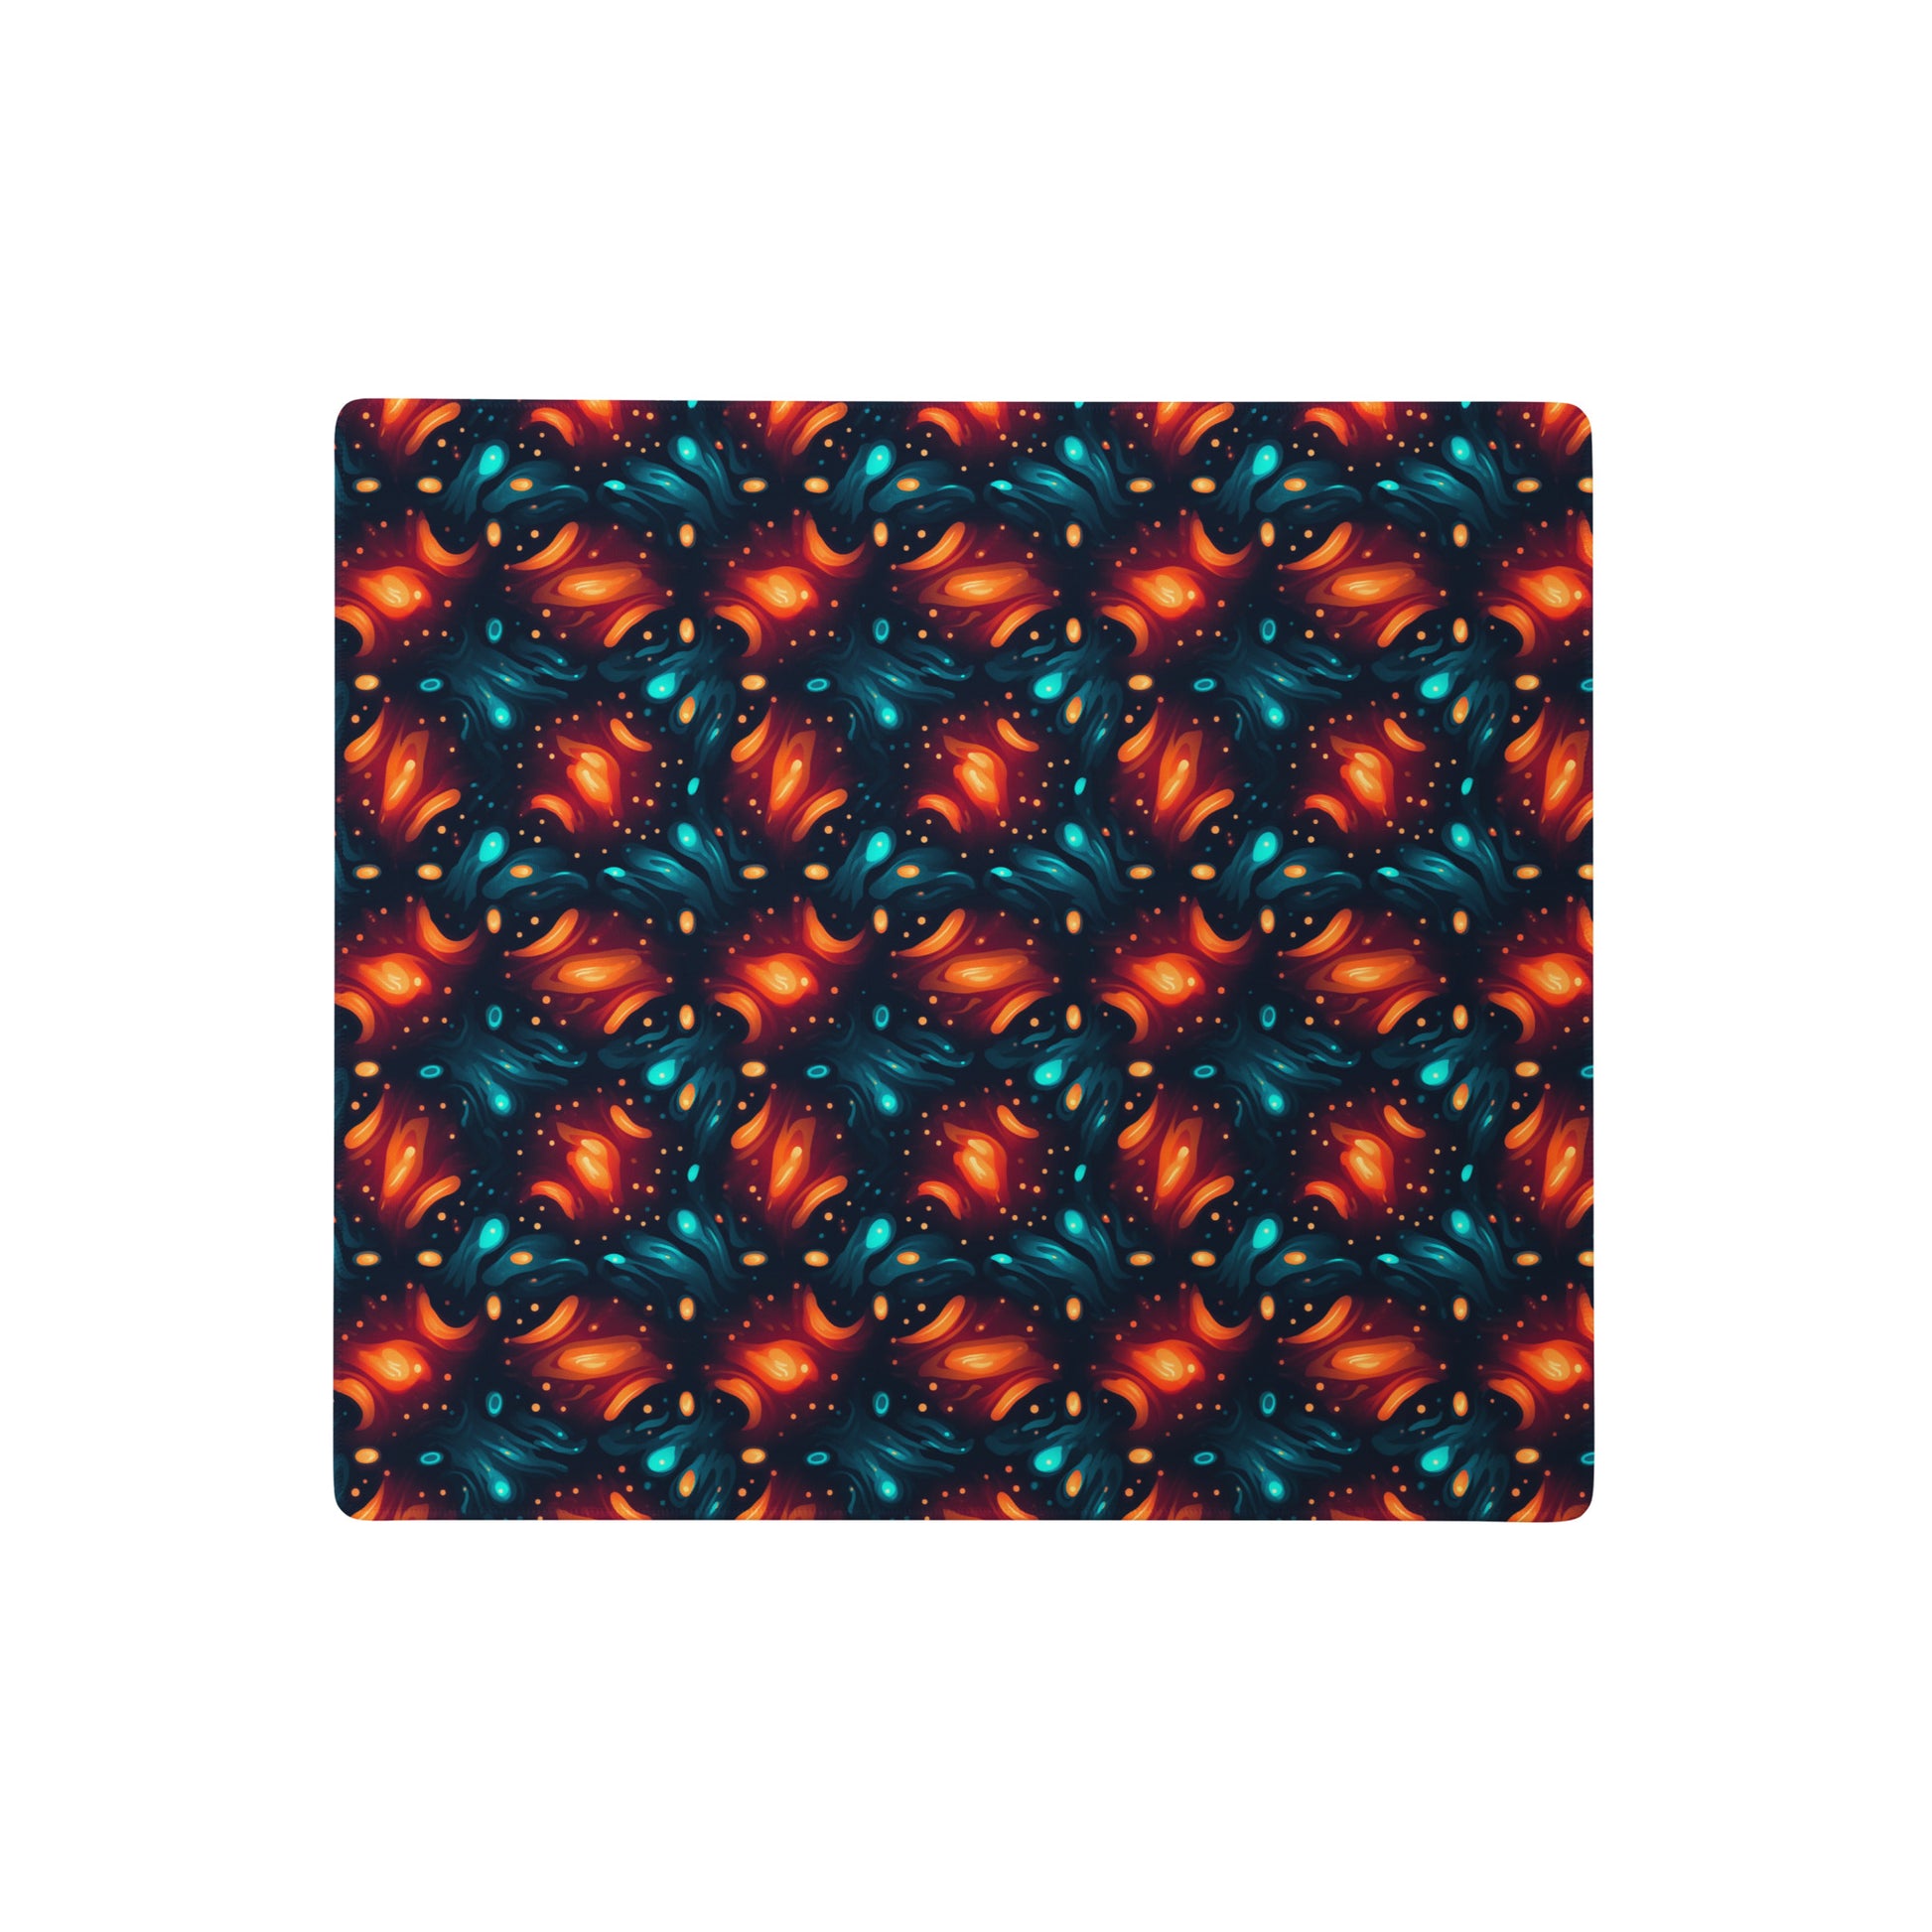 A 18" x 16" desk pad with a blue and orange abstract cross hatch pattern.